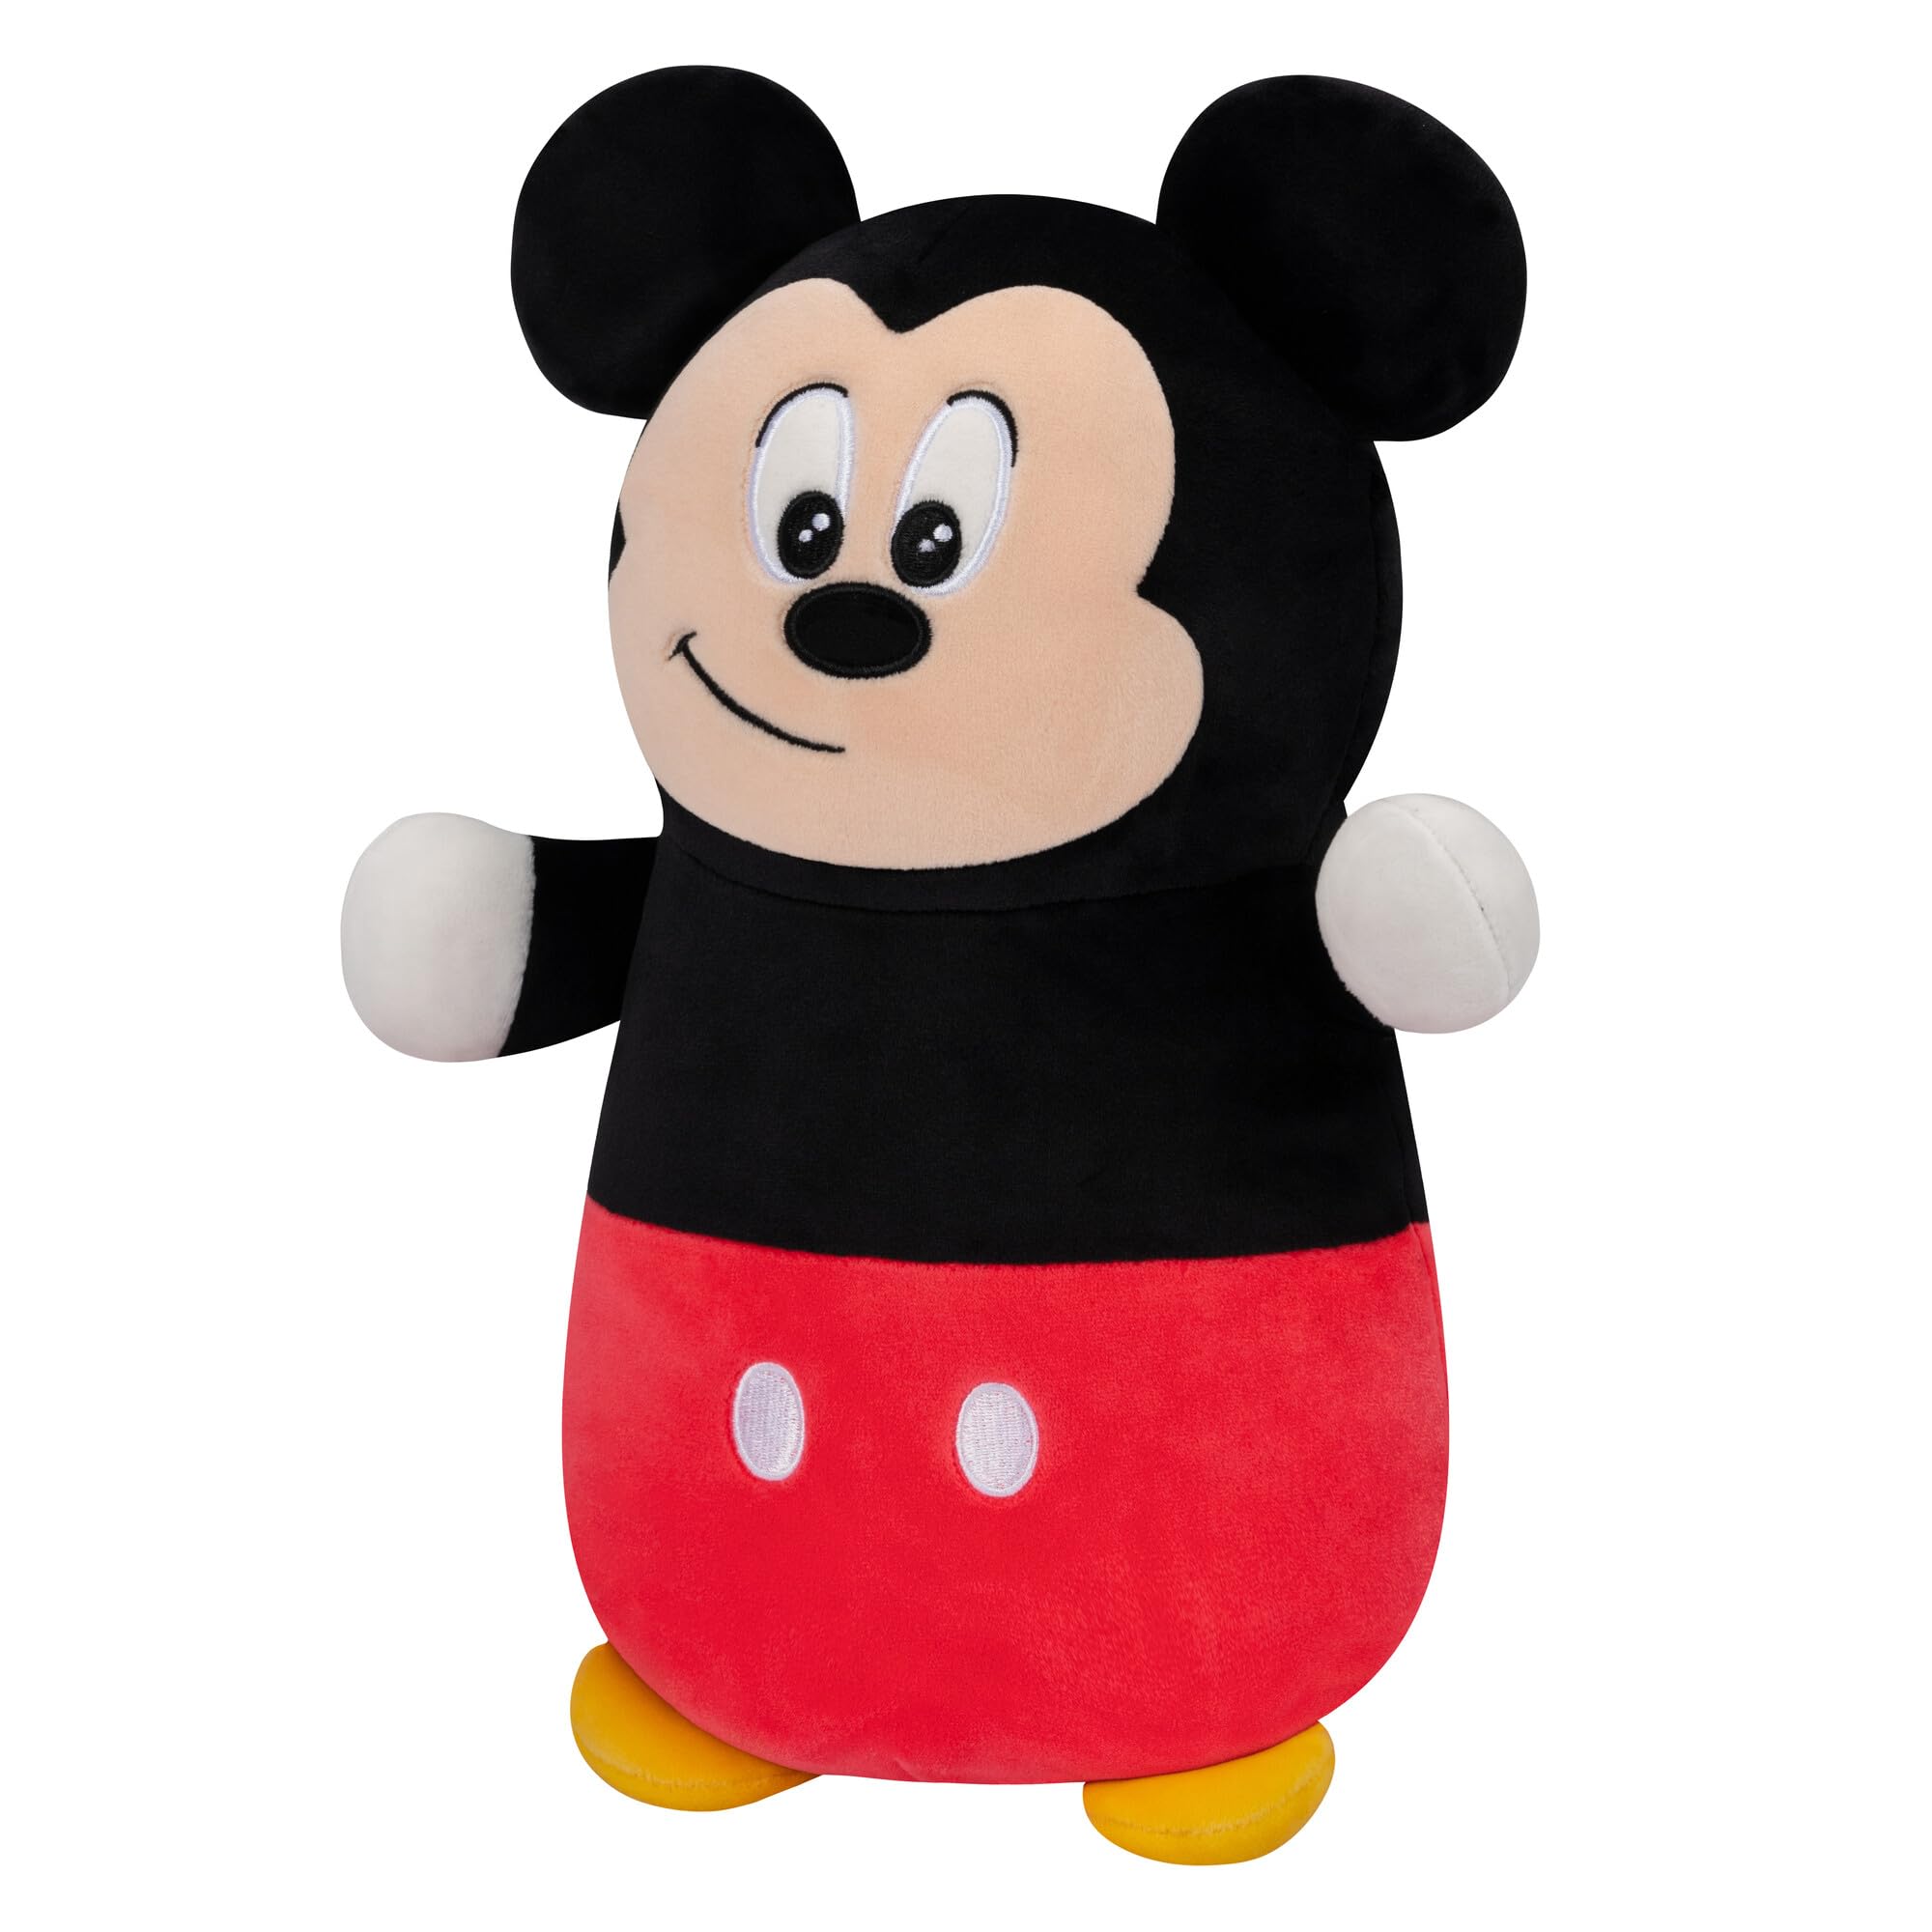 Squishmallows Original Disney 10-Inch Mickey Mouse HugMees - Medium-Sized Ultrasoft Official Jazwares Plush